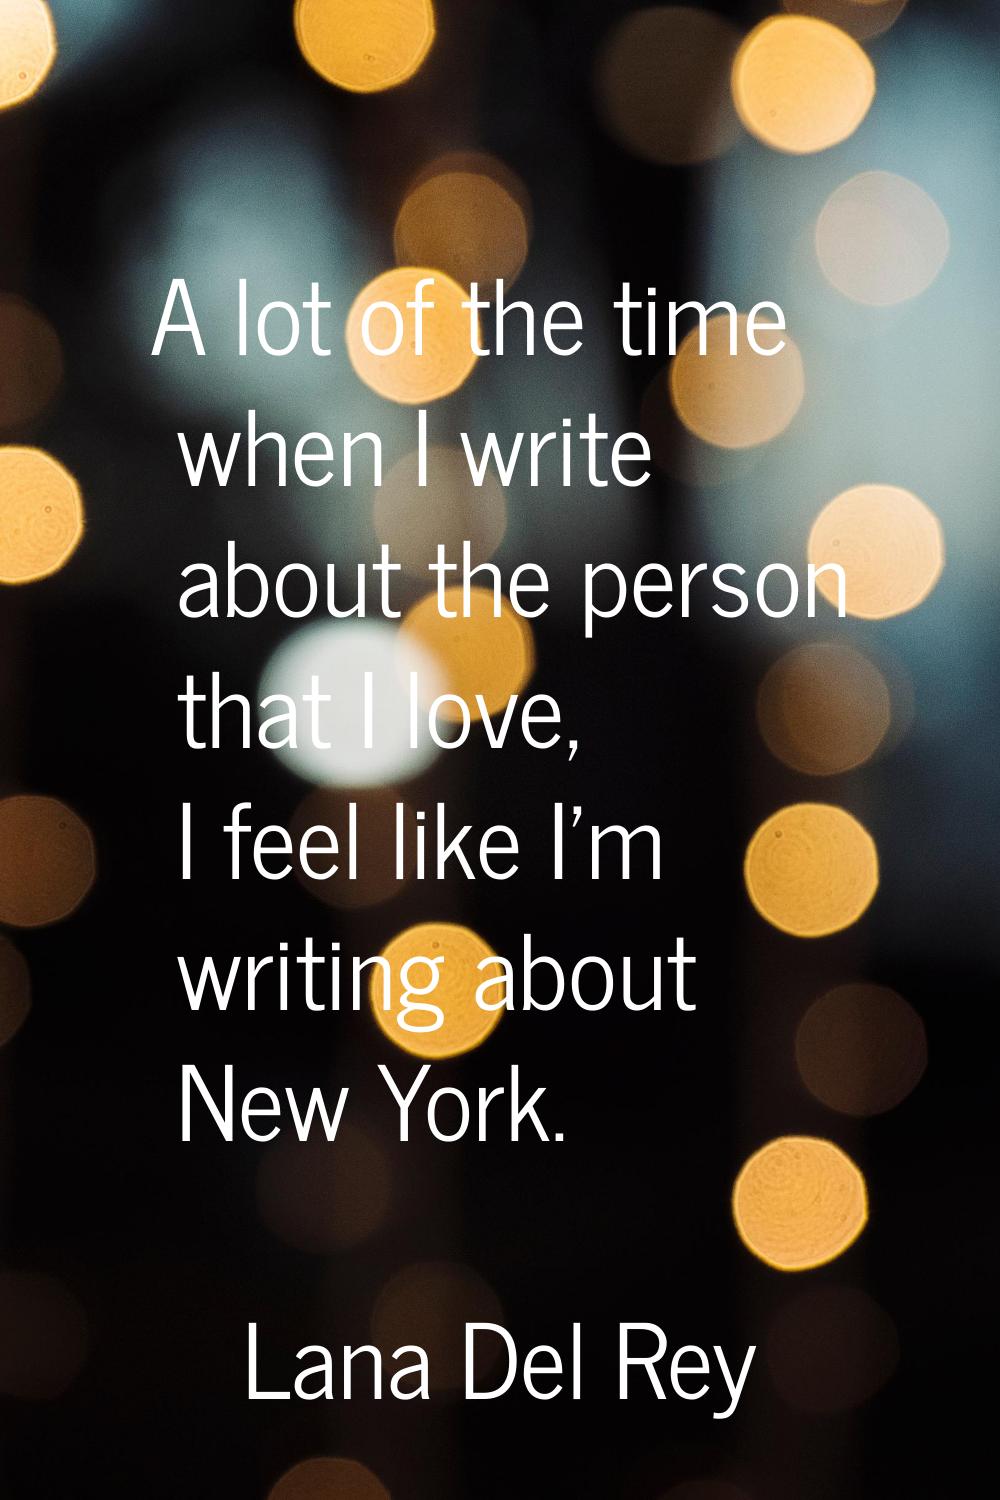 A lot of the time when I write about the person that I love, I feel like I'm writing about New York